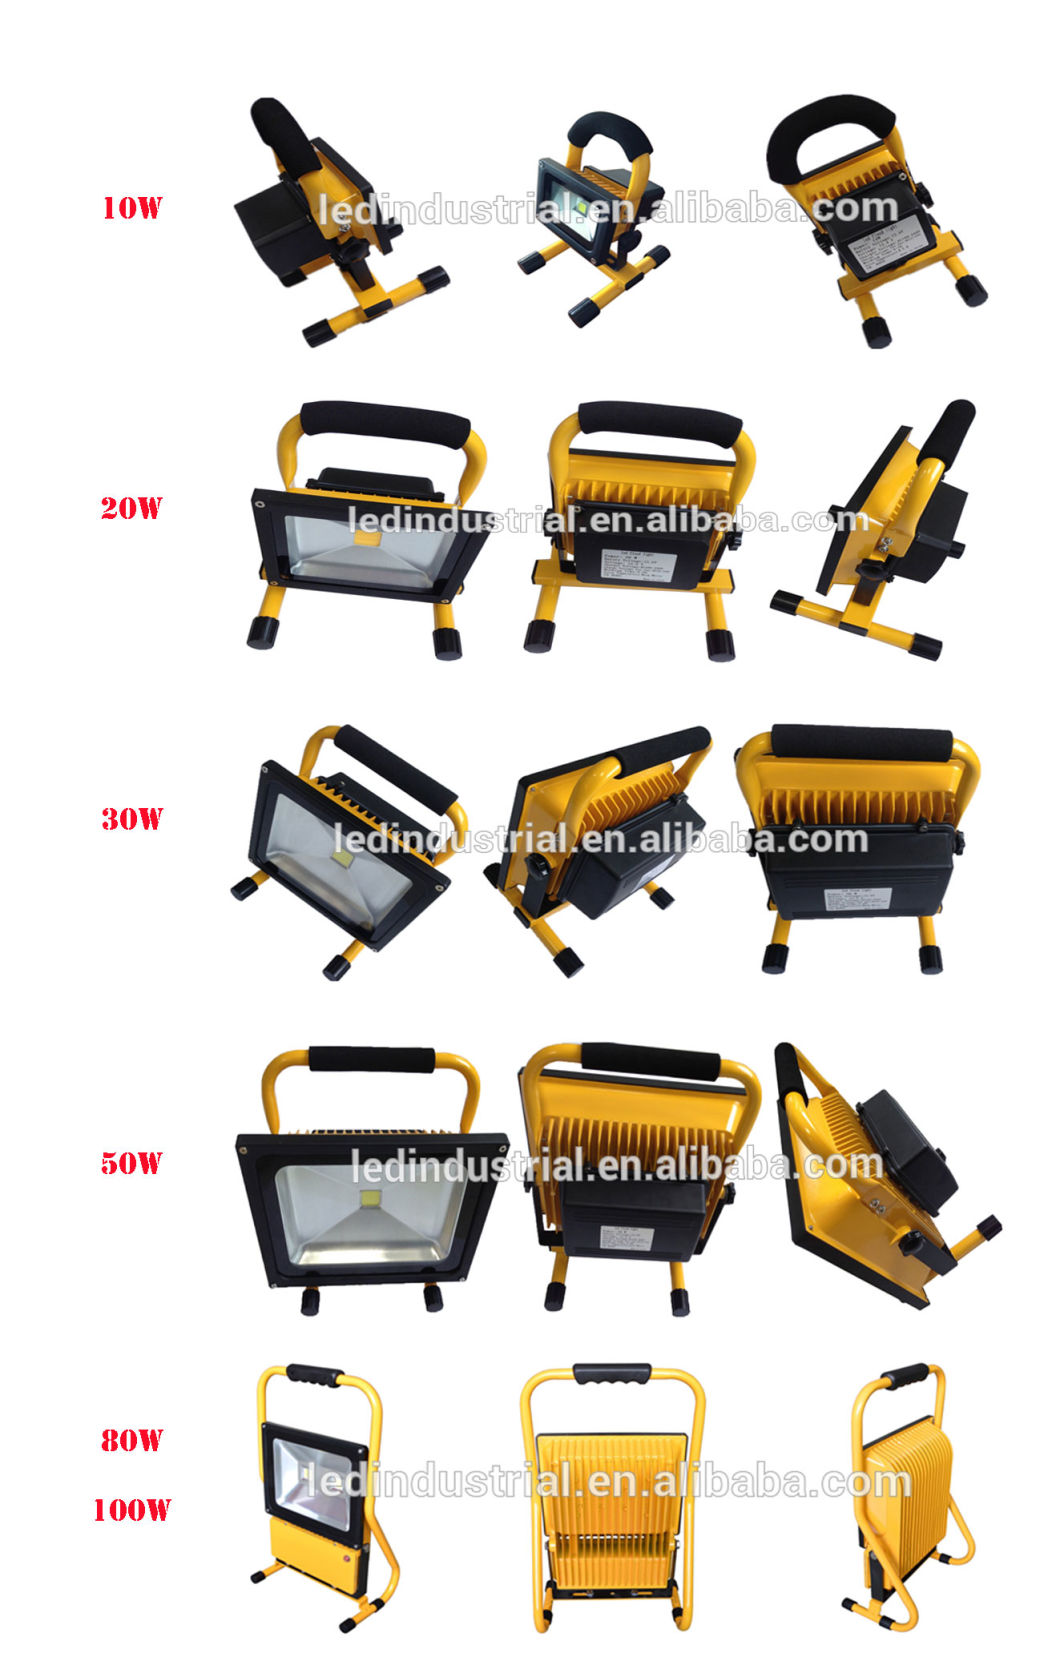 10W-200W Outdoor Portable Rechargeable LED Flood Light for Emergency